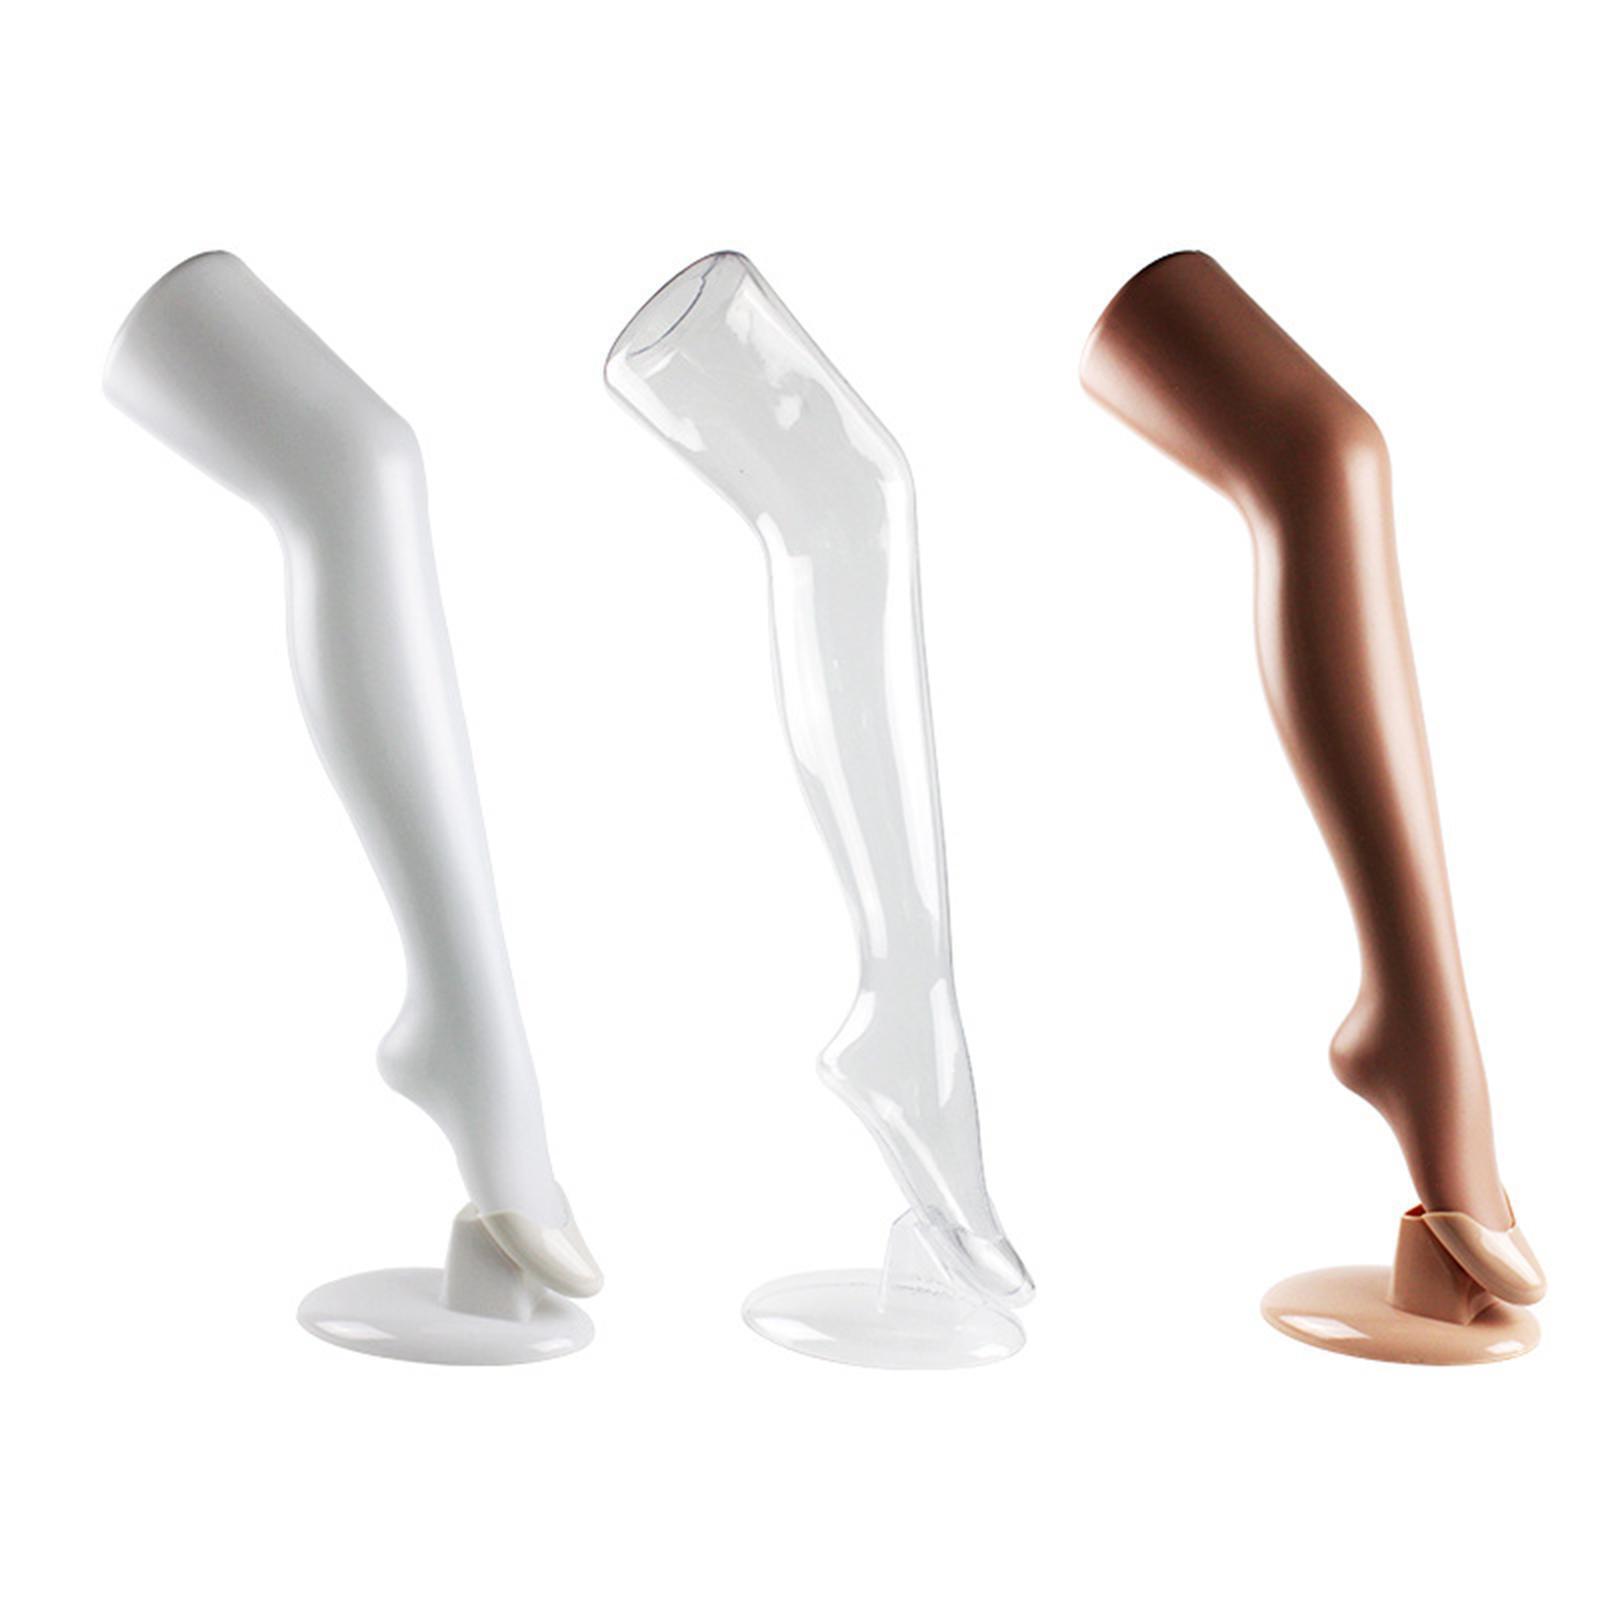 Free Standing Hosiery Mannequin Leg Practical Sock Display For Commercial Shop F